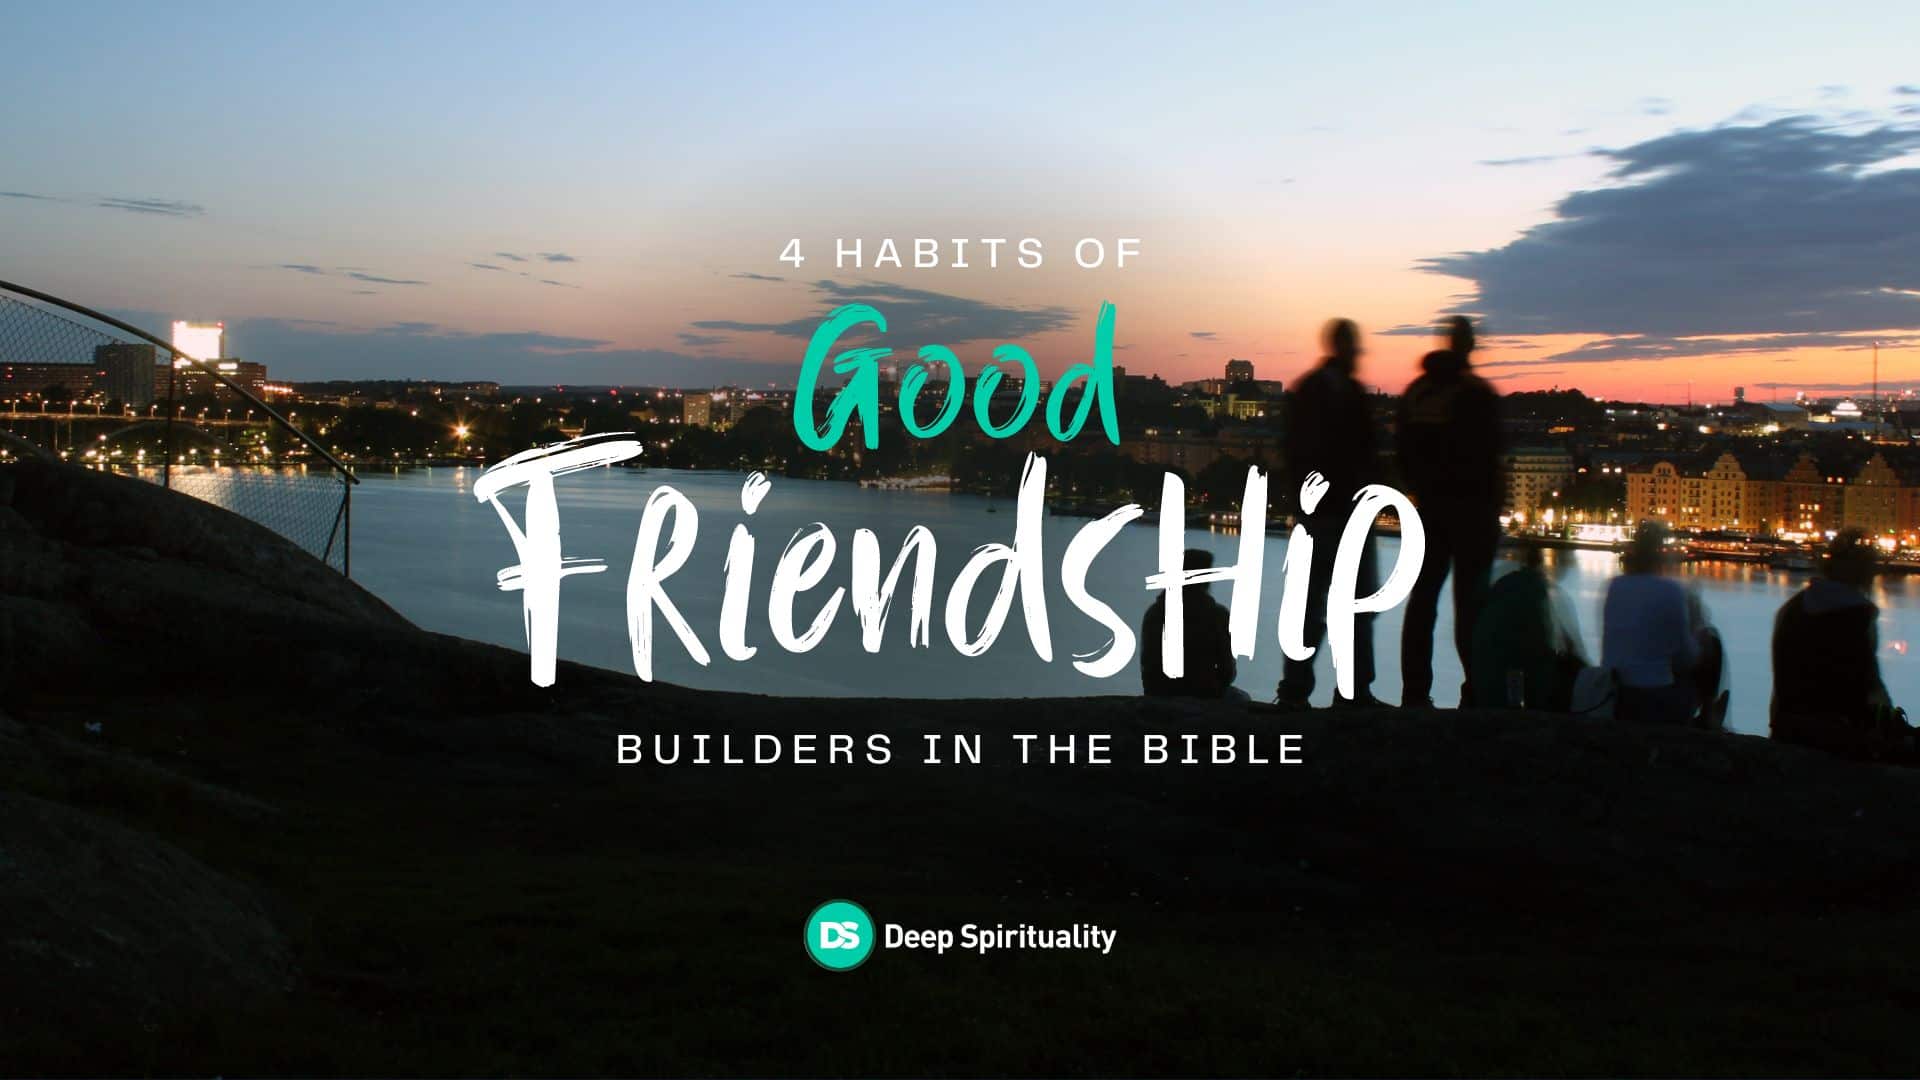 4 Habits to Build if You Want Good Friendships, According to the Bible 3